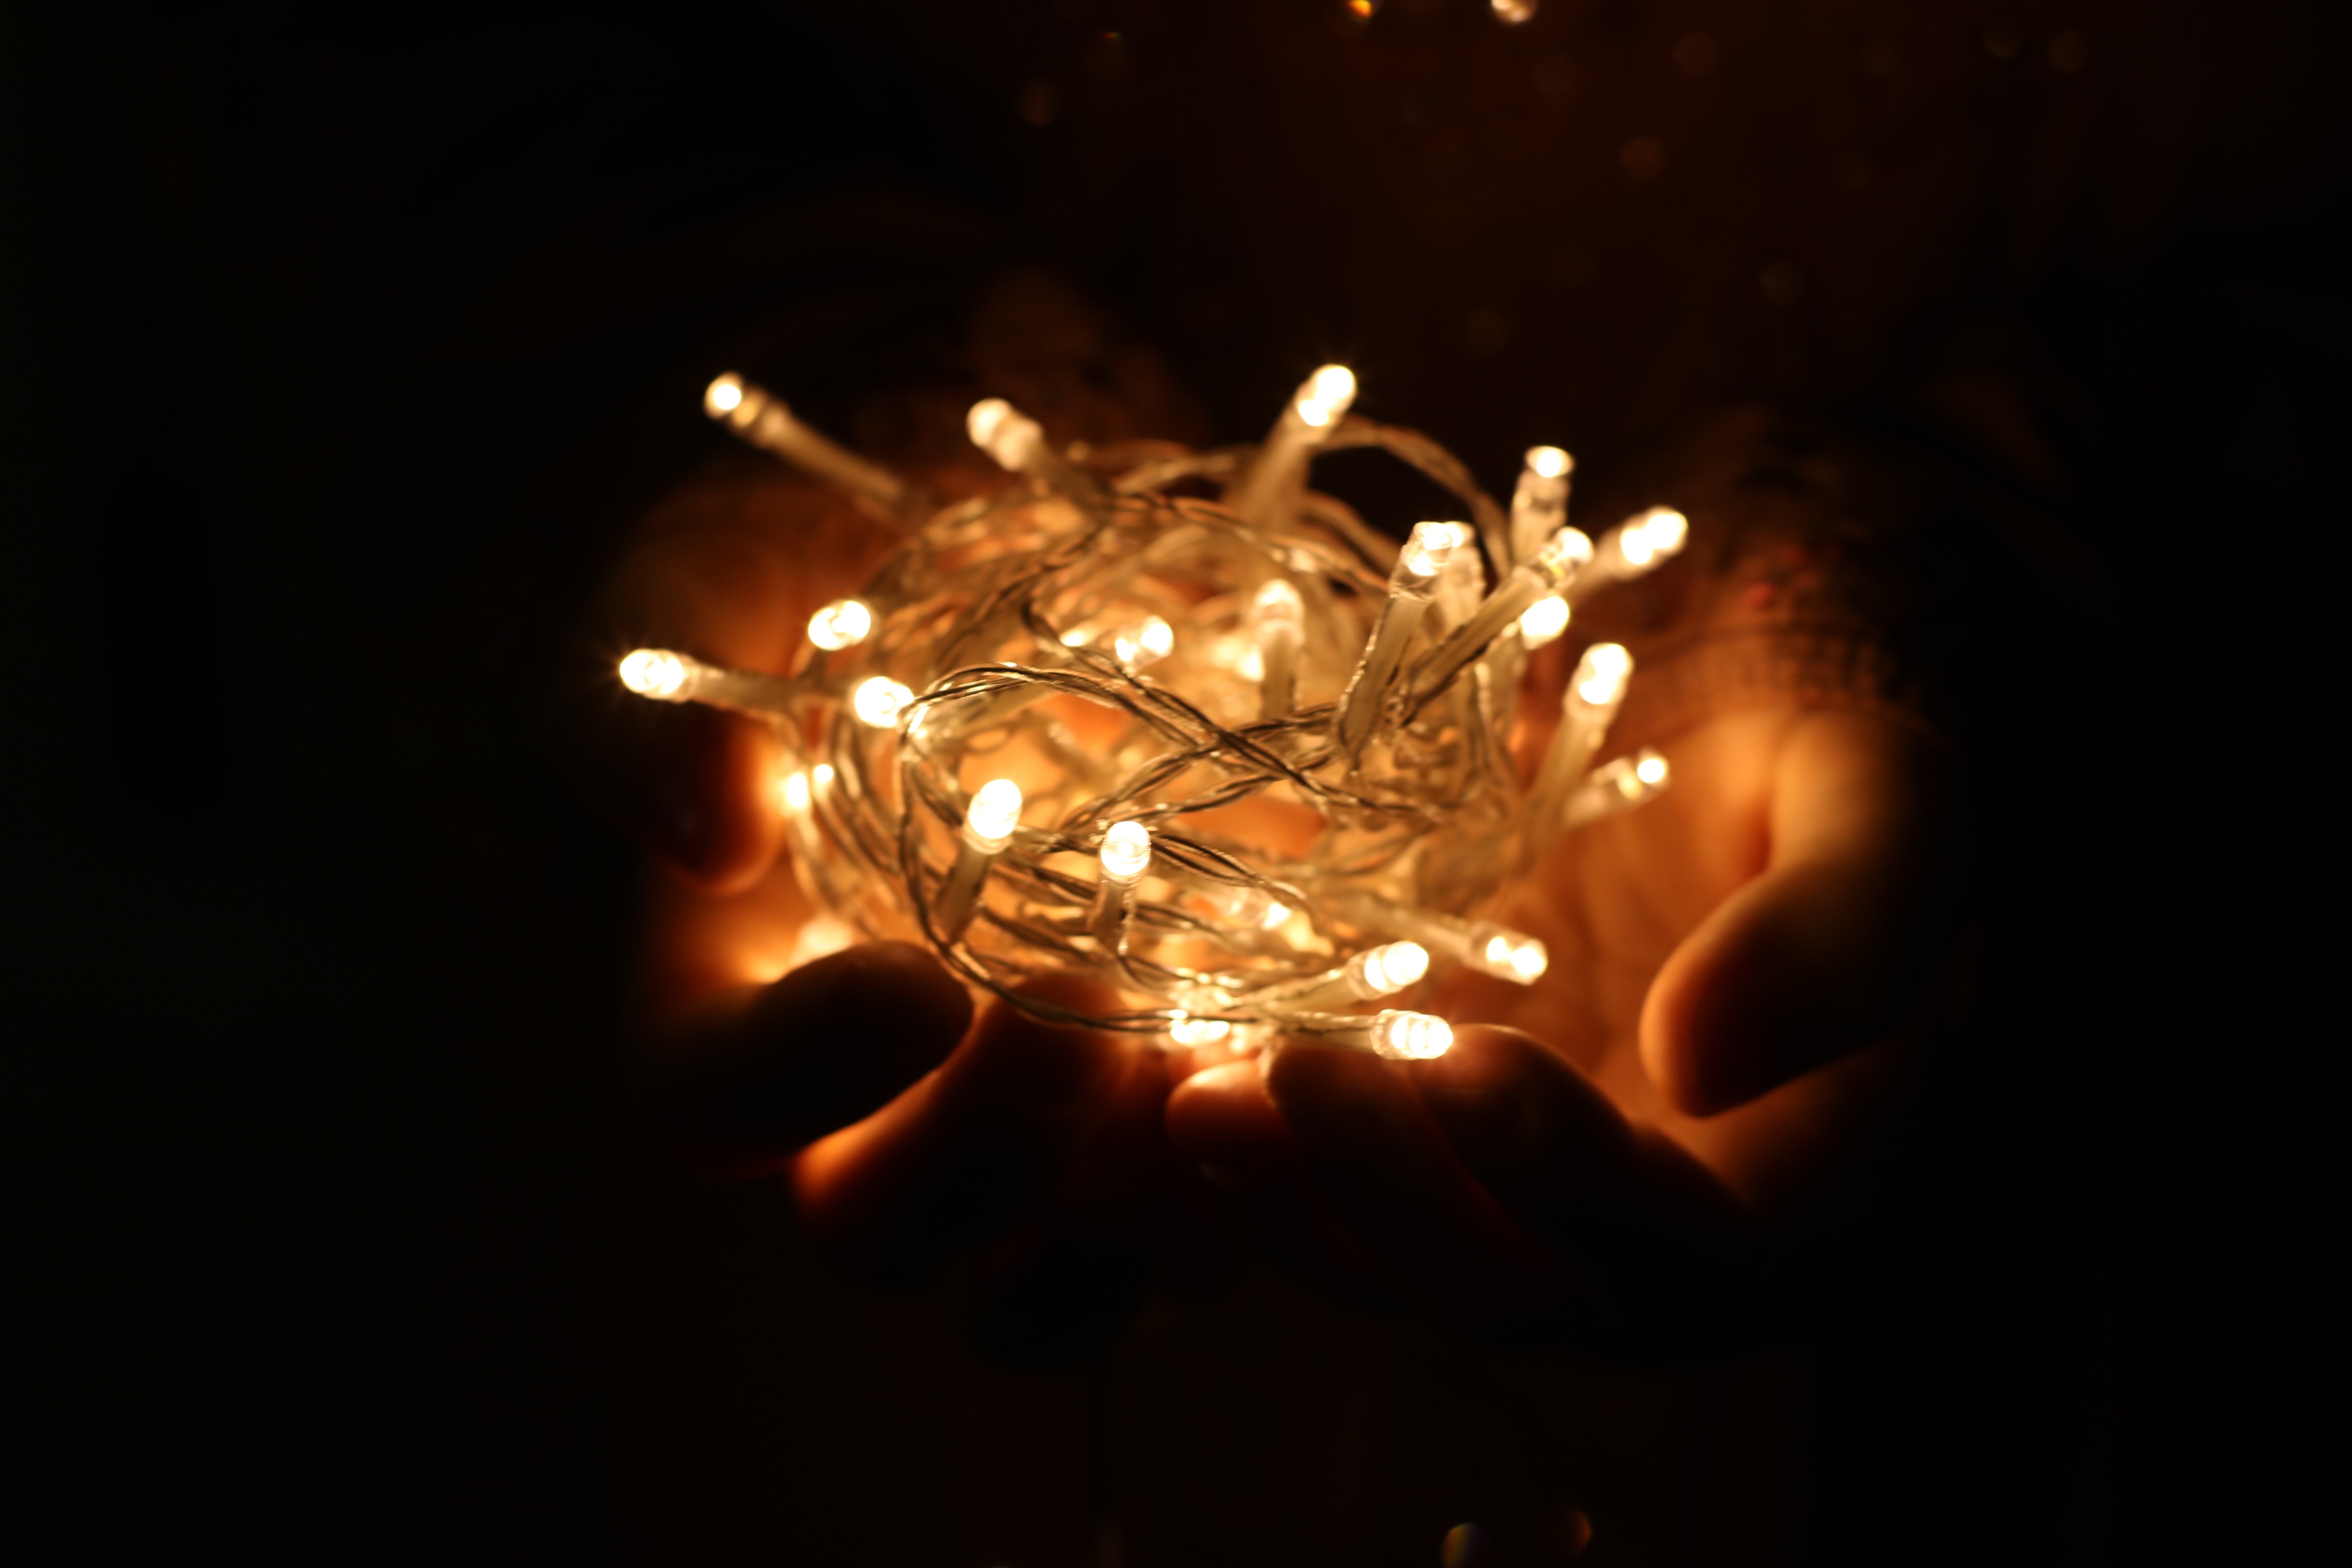 Person showing white string lights during nightime photo